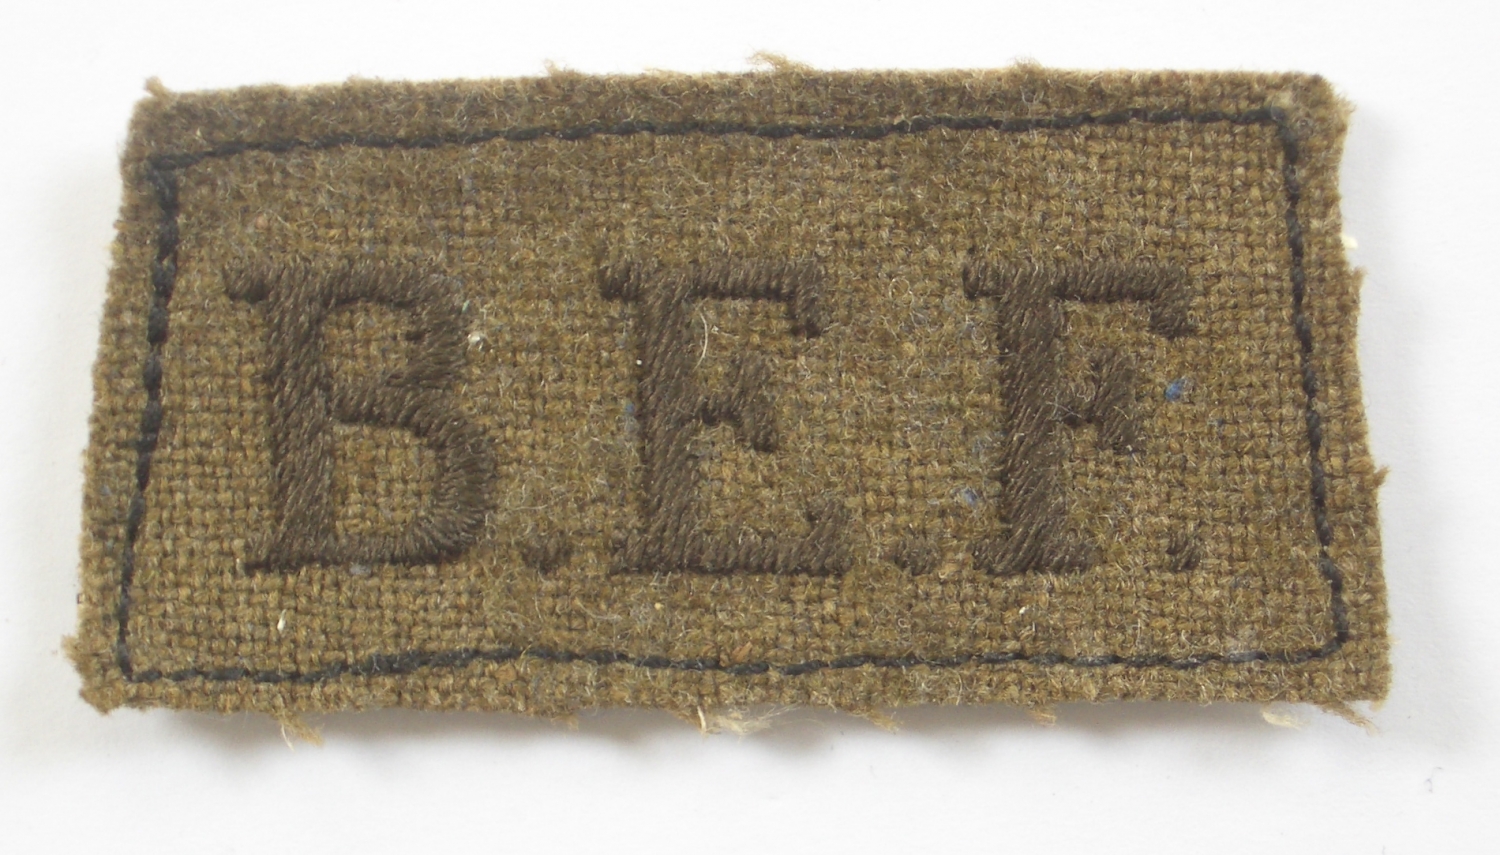 BEF British Expeditionary Force Slip on title